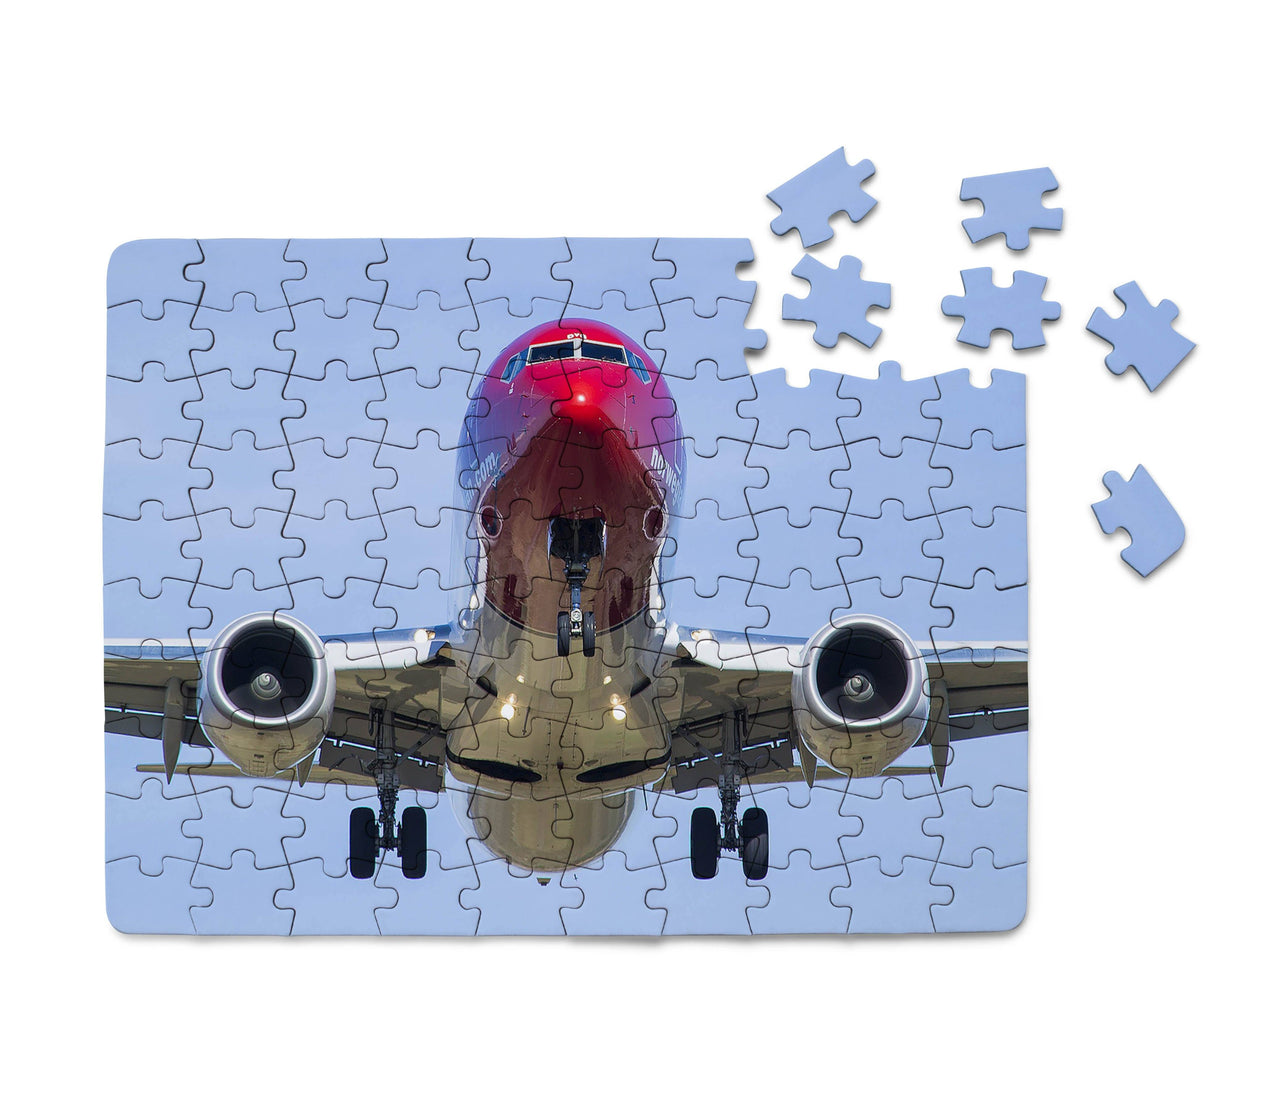 Face to Face with Norwegian Boeing 737 Printed Puzzles Aviation Shop 